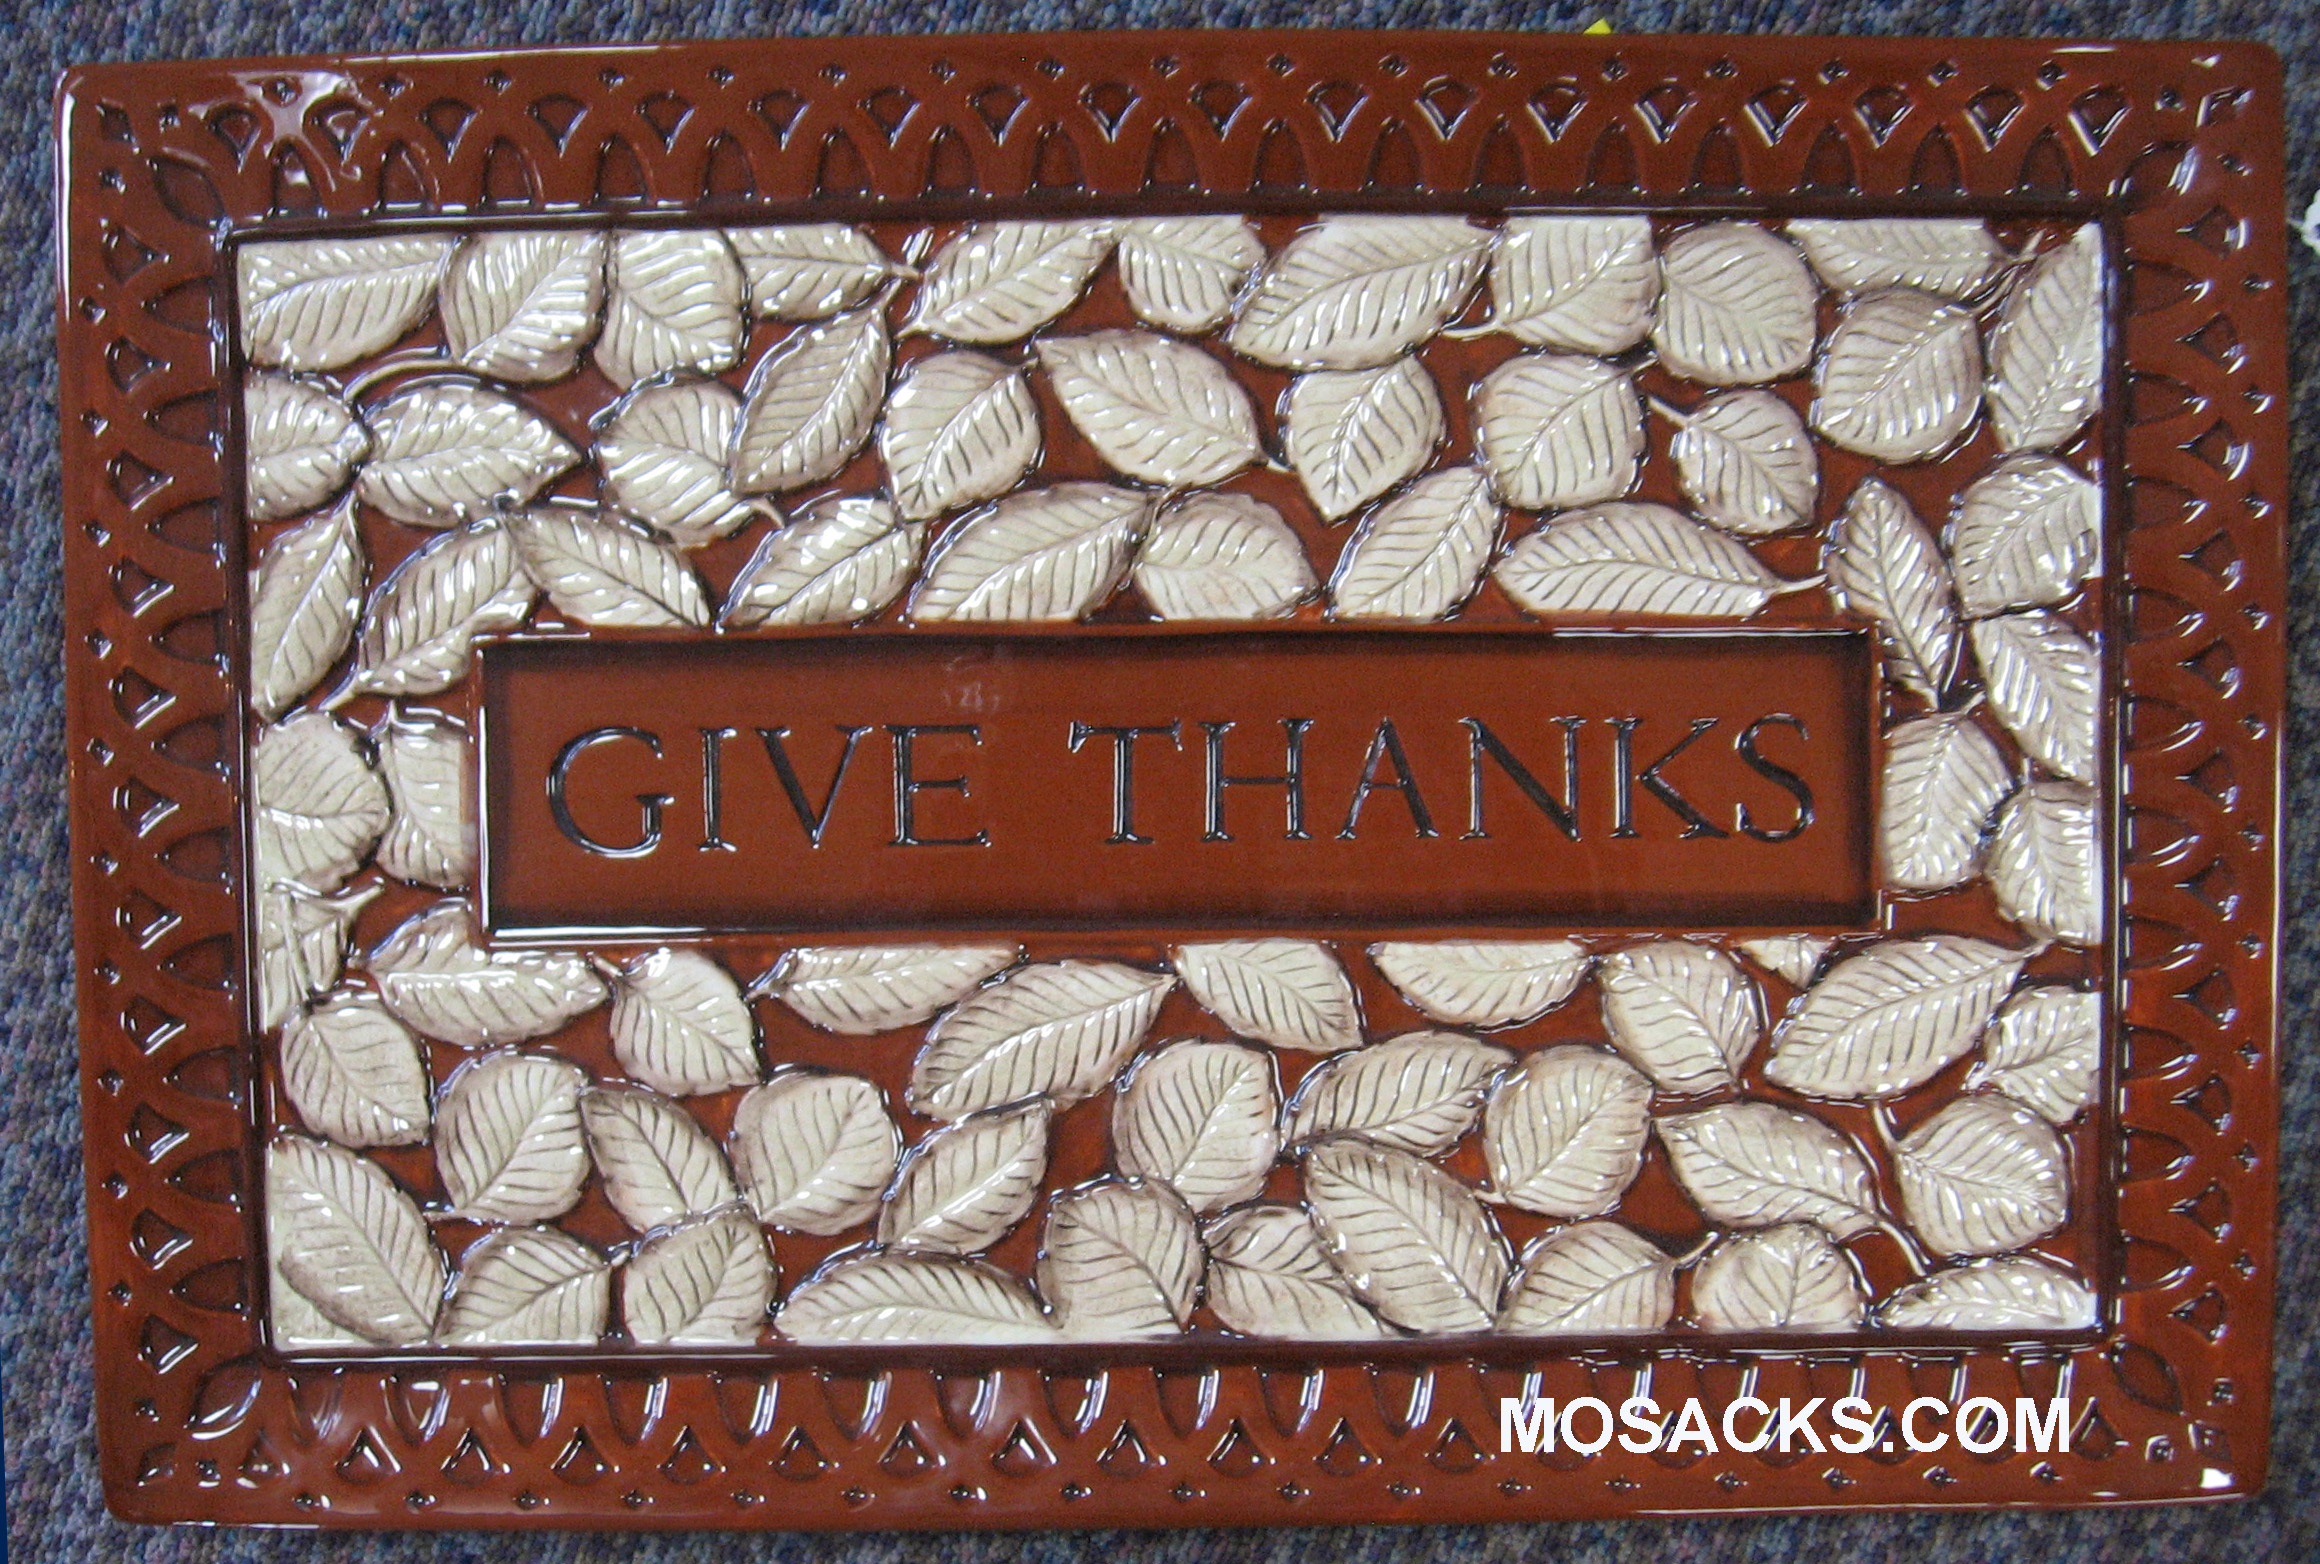 Give Thanks Brown Serving Platter 13 1/4"  W x 20" L440286